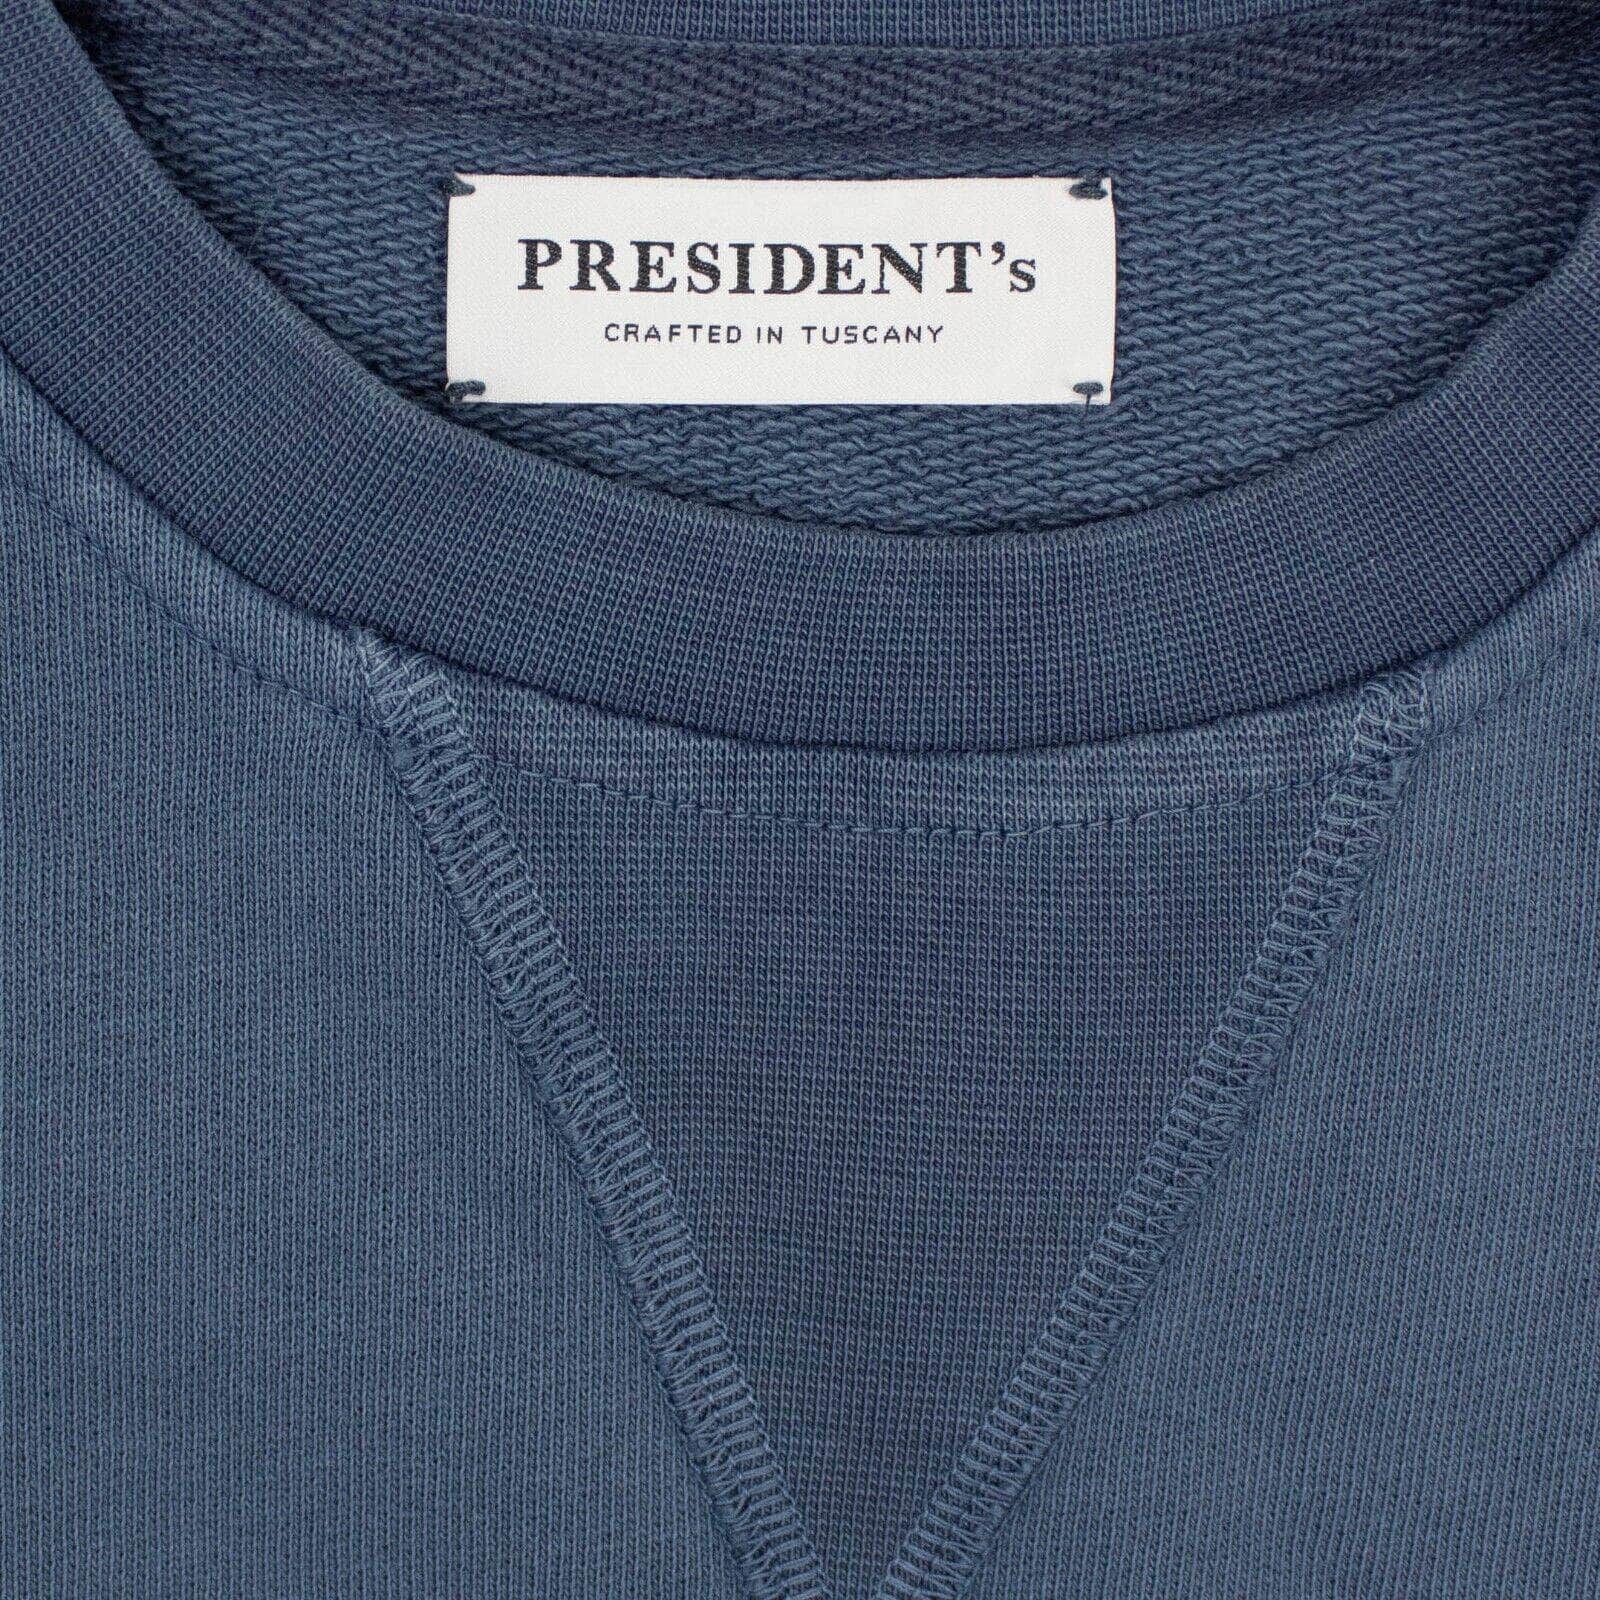 President's channelenable-all, chicmi, couponcollection, gender-mens, main-clothing, mens-crewnecks, mens-shoes, MixedApparel, presidents, size-m, size-s, size-xxl, under-250 Blue Organic Pullover Crewneck Sweater